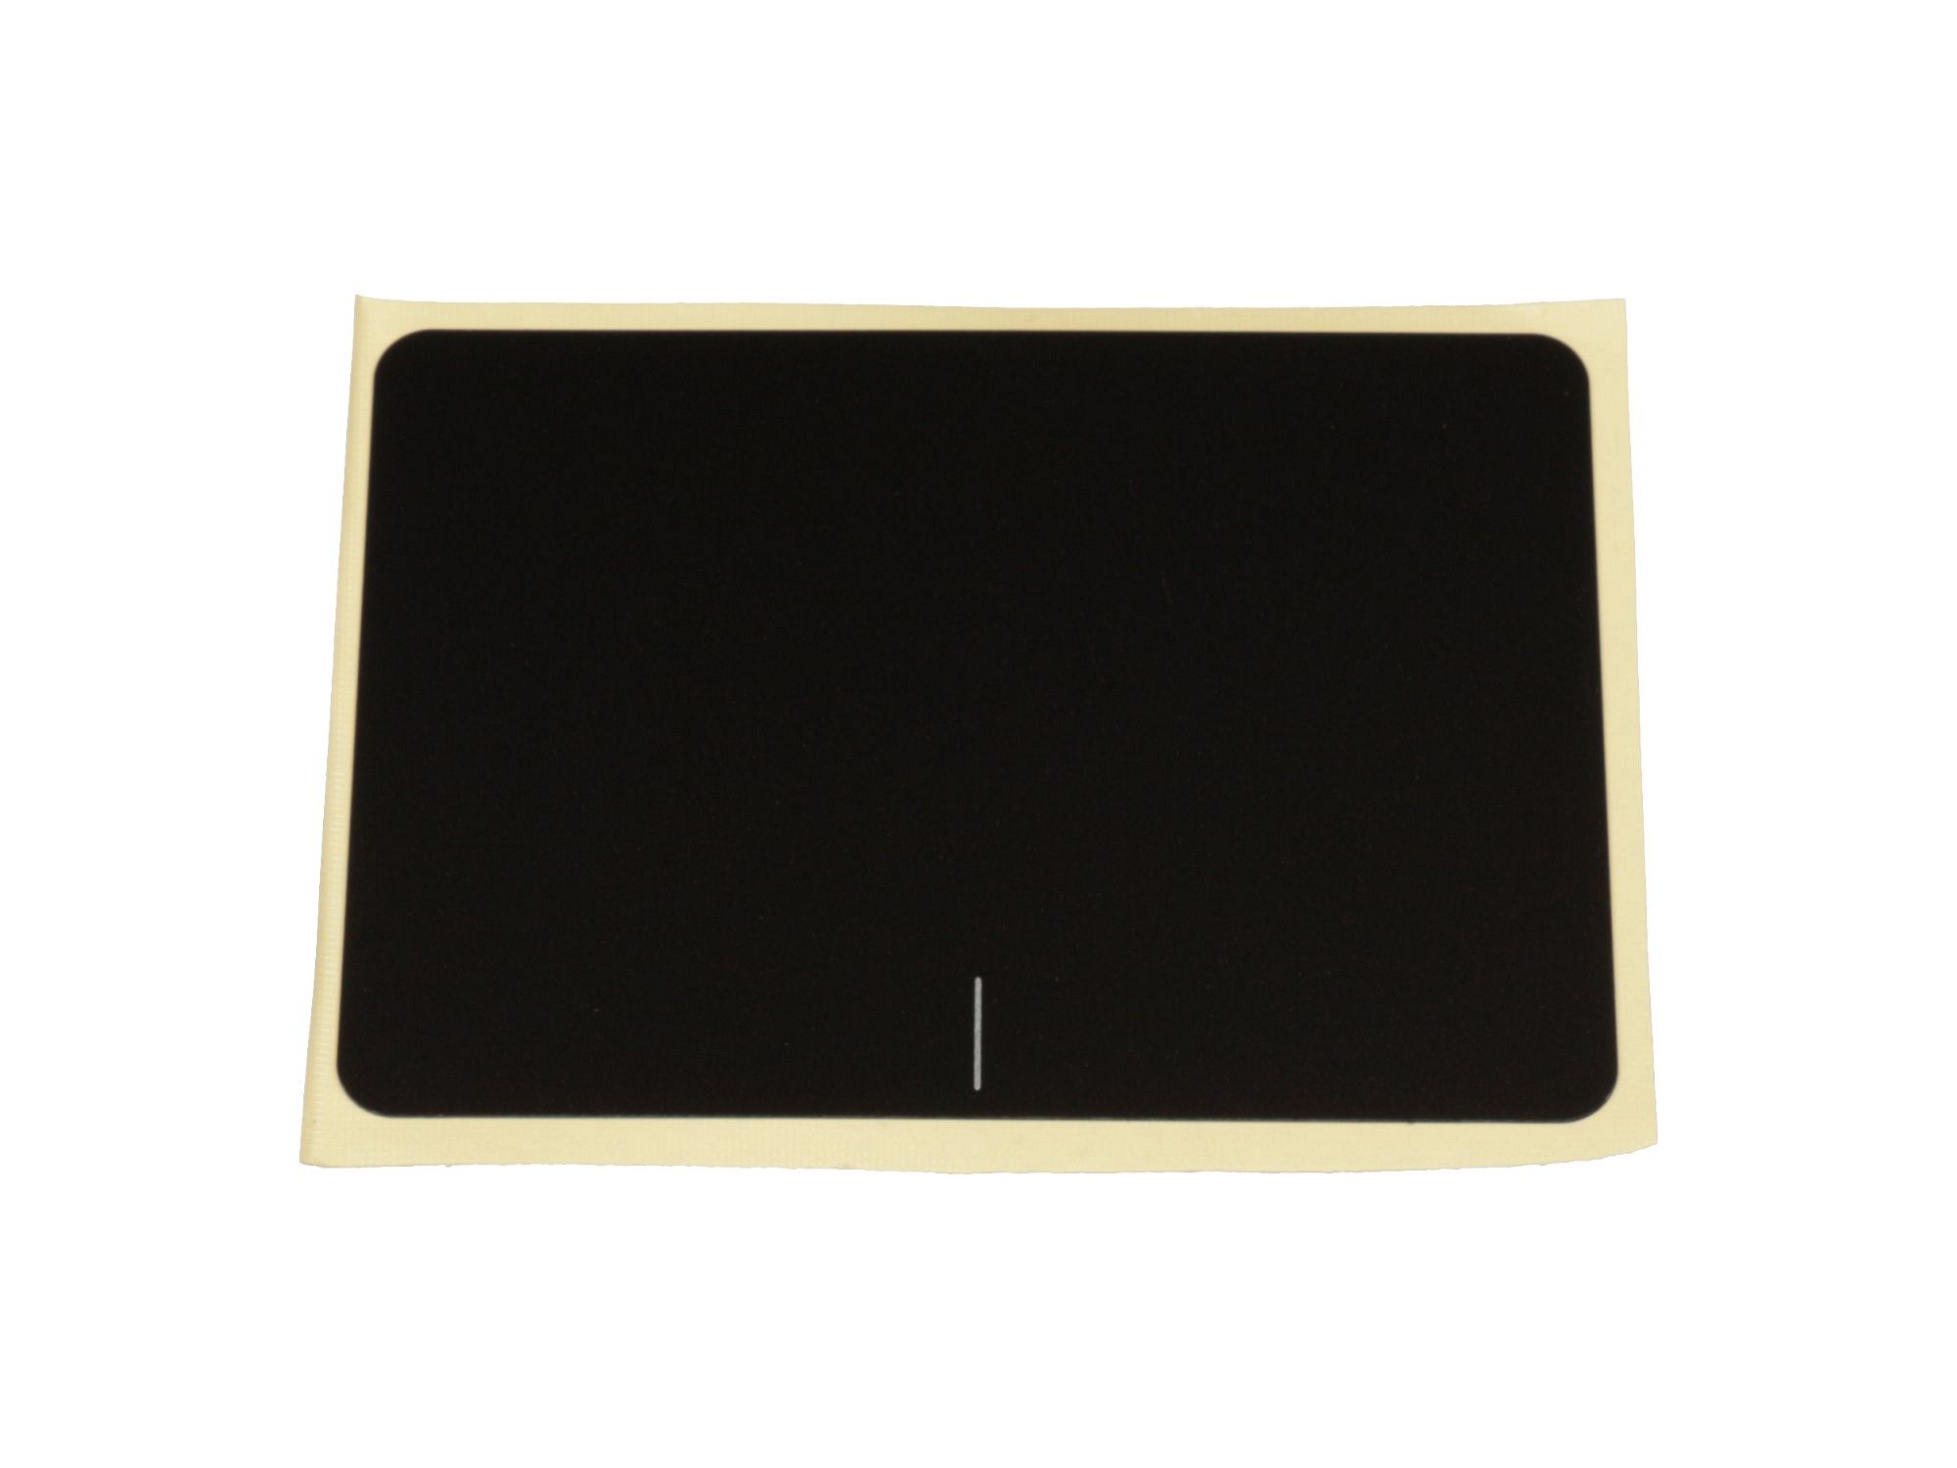 Touchpad-Cover für Asus F756UJ